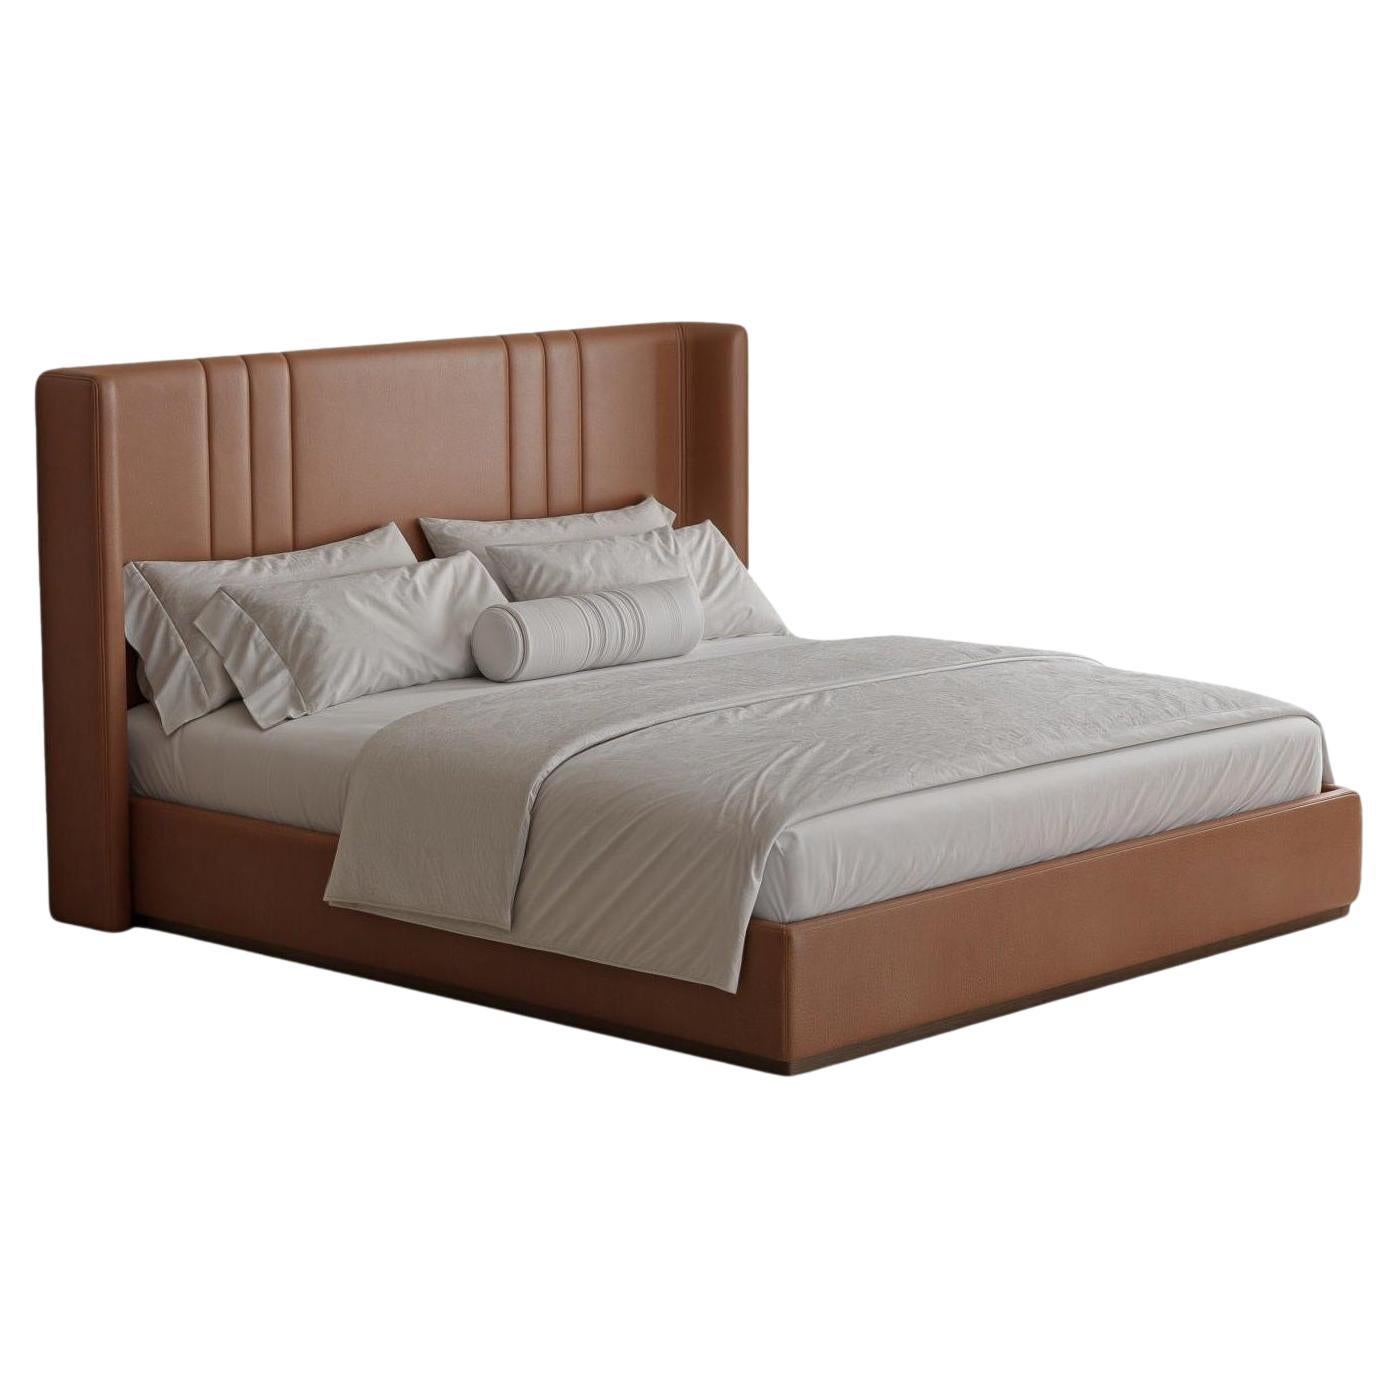 Contemporary King-Size Leather Bed With Detailed Headboard Stitching For Sale